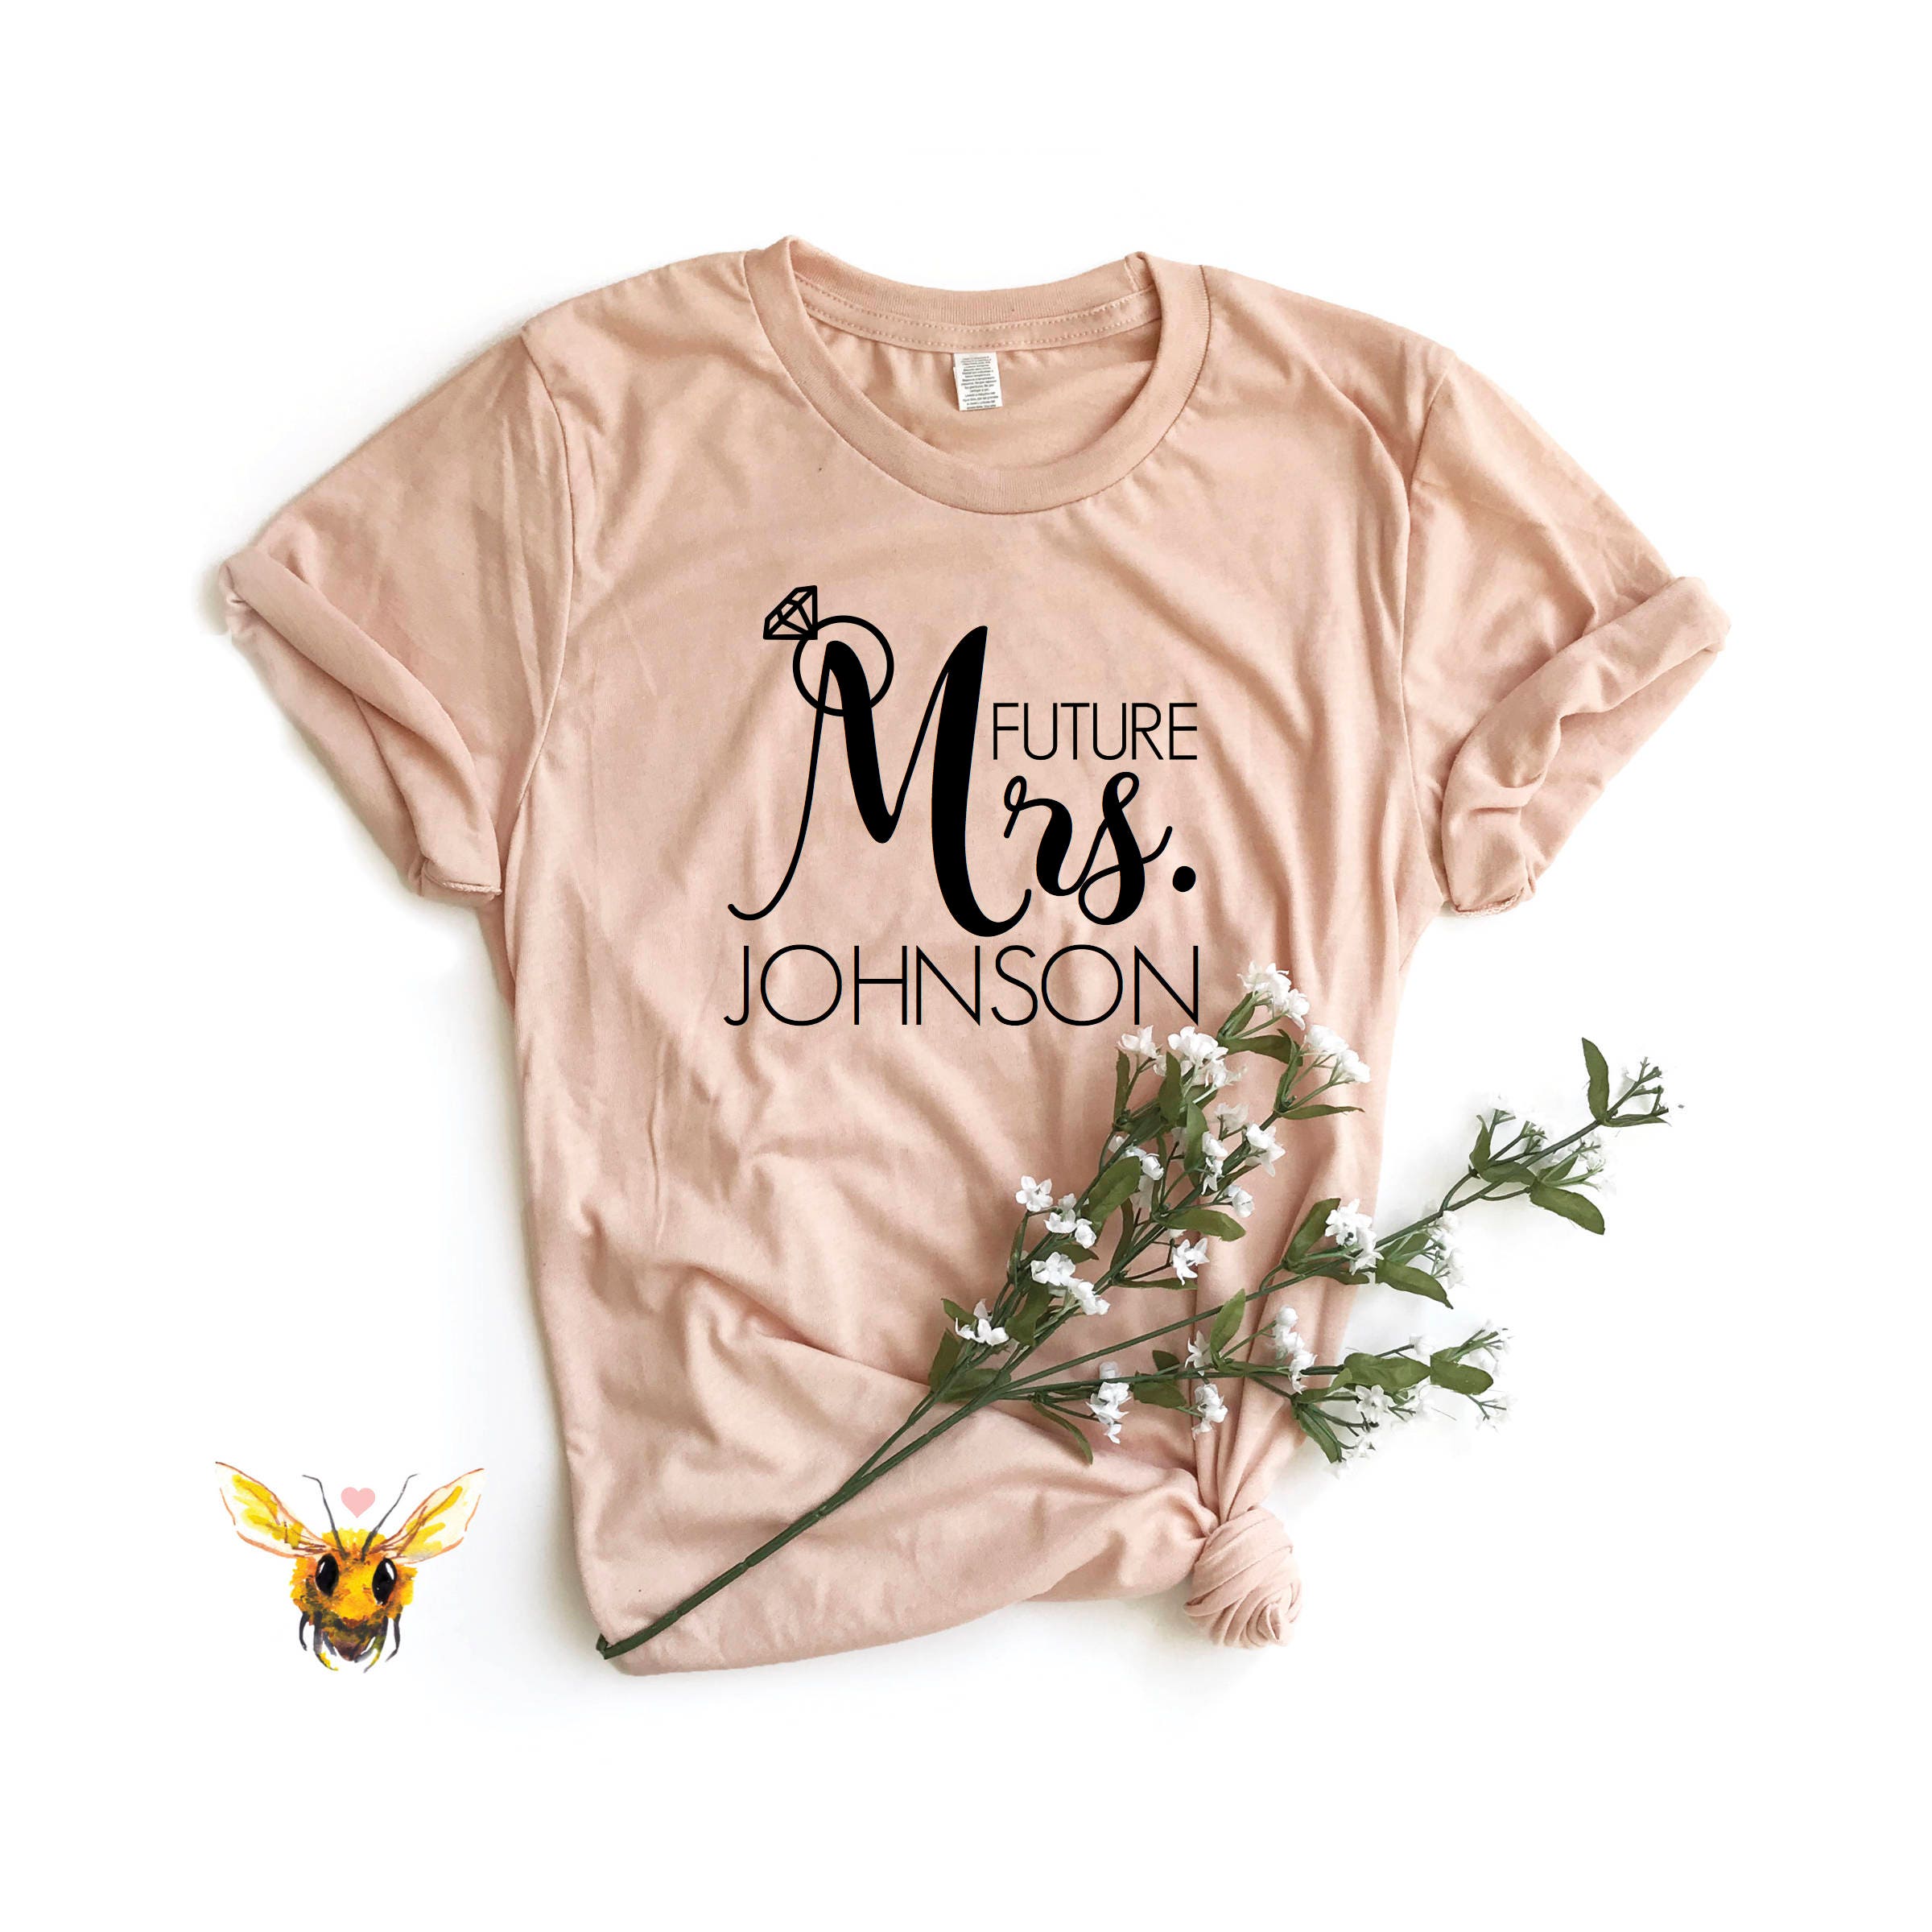 Cute Graphic Tee -Newly Engaged Shirt Bachelorette Party Shirts Bridal Shower Gift Engagement Gift Bride Shirt Wedding Party Gift